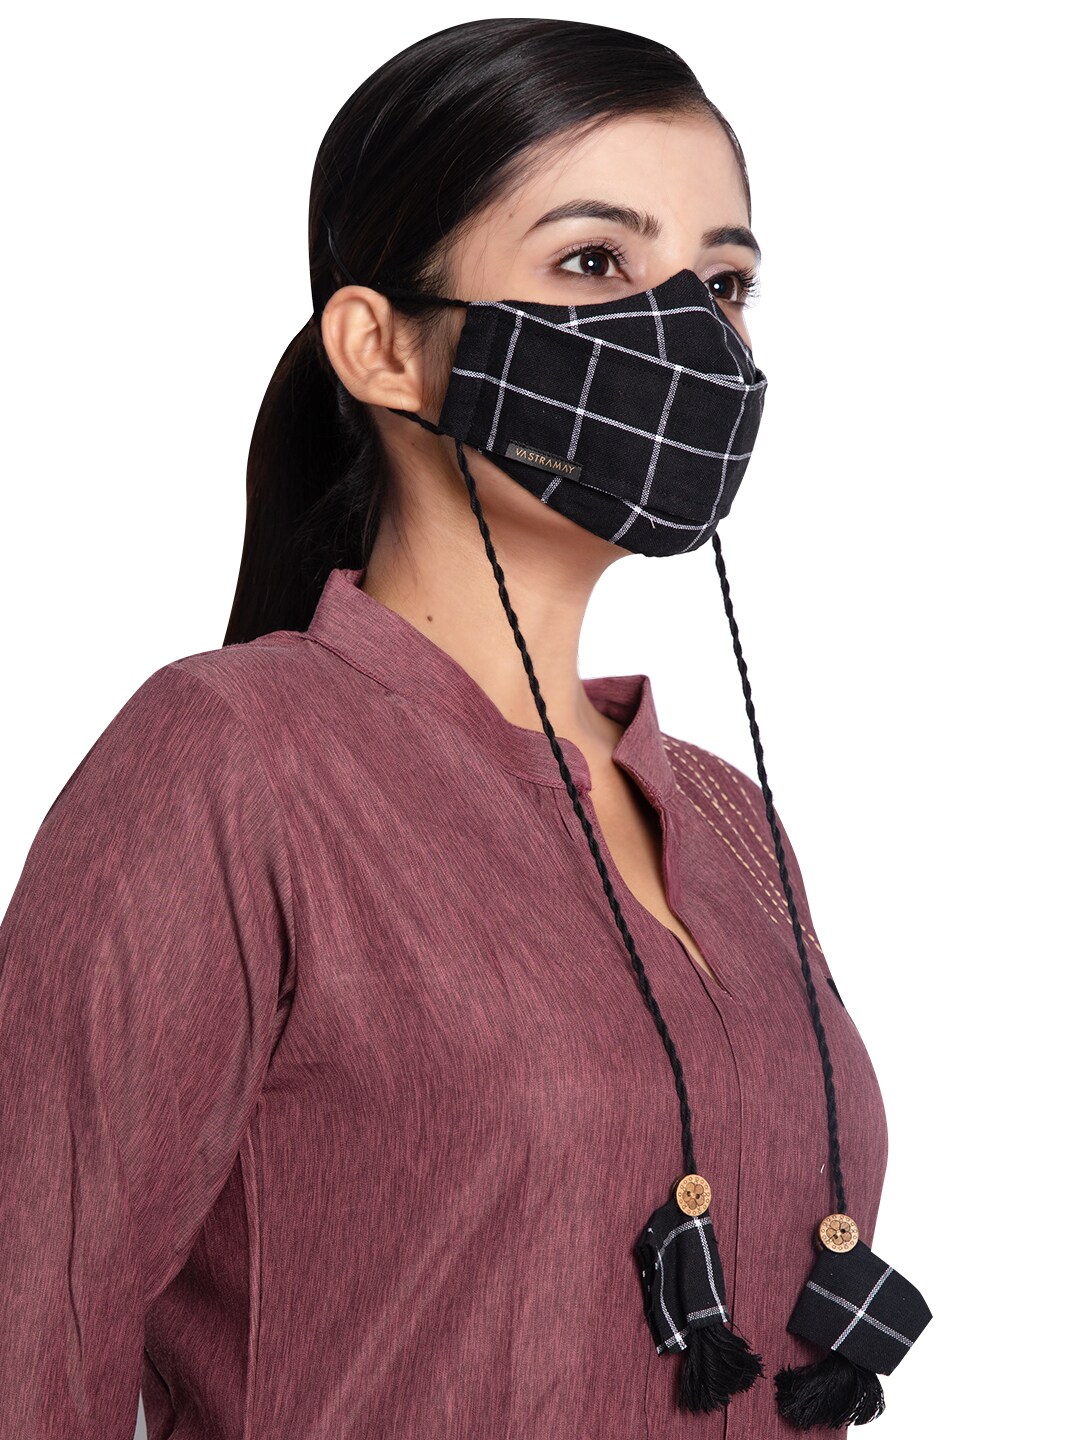 VASTRAMAY Unisex Black 3-Ply Reusable Cloth Mask Price in India